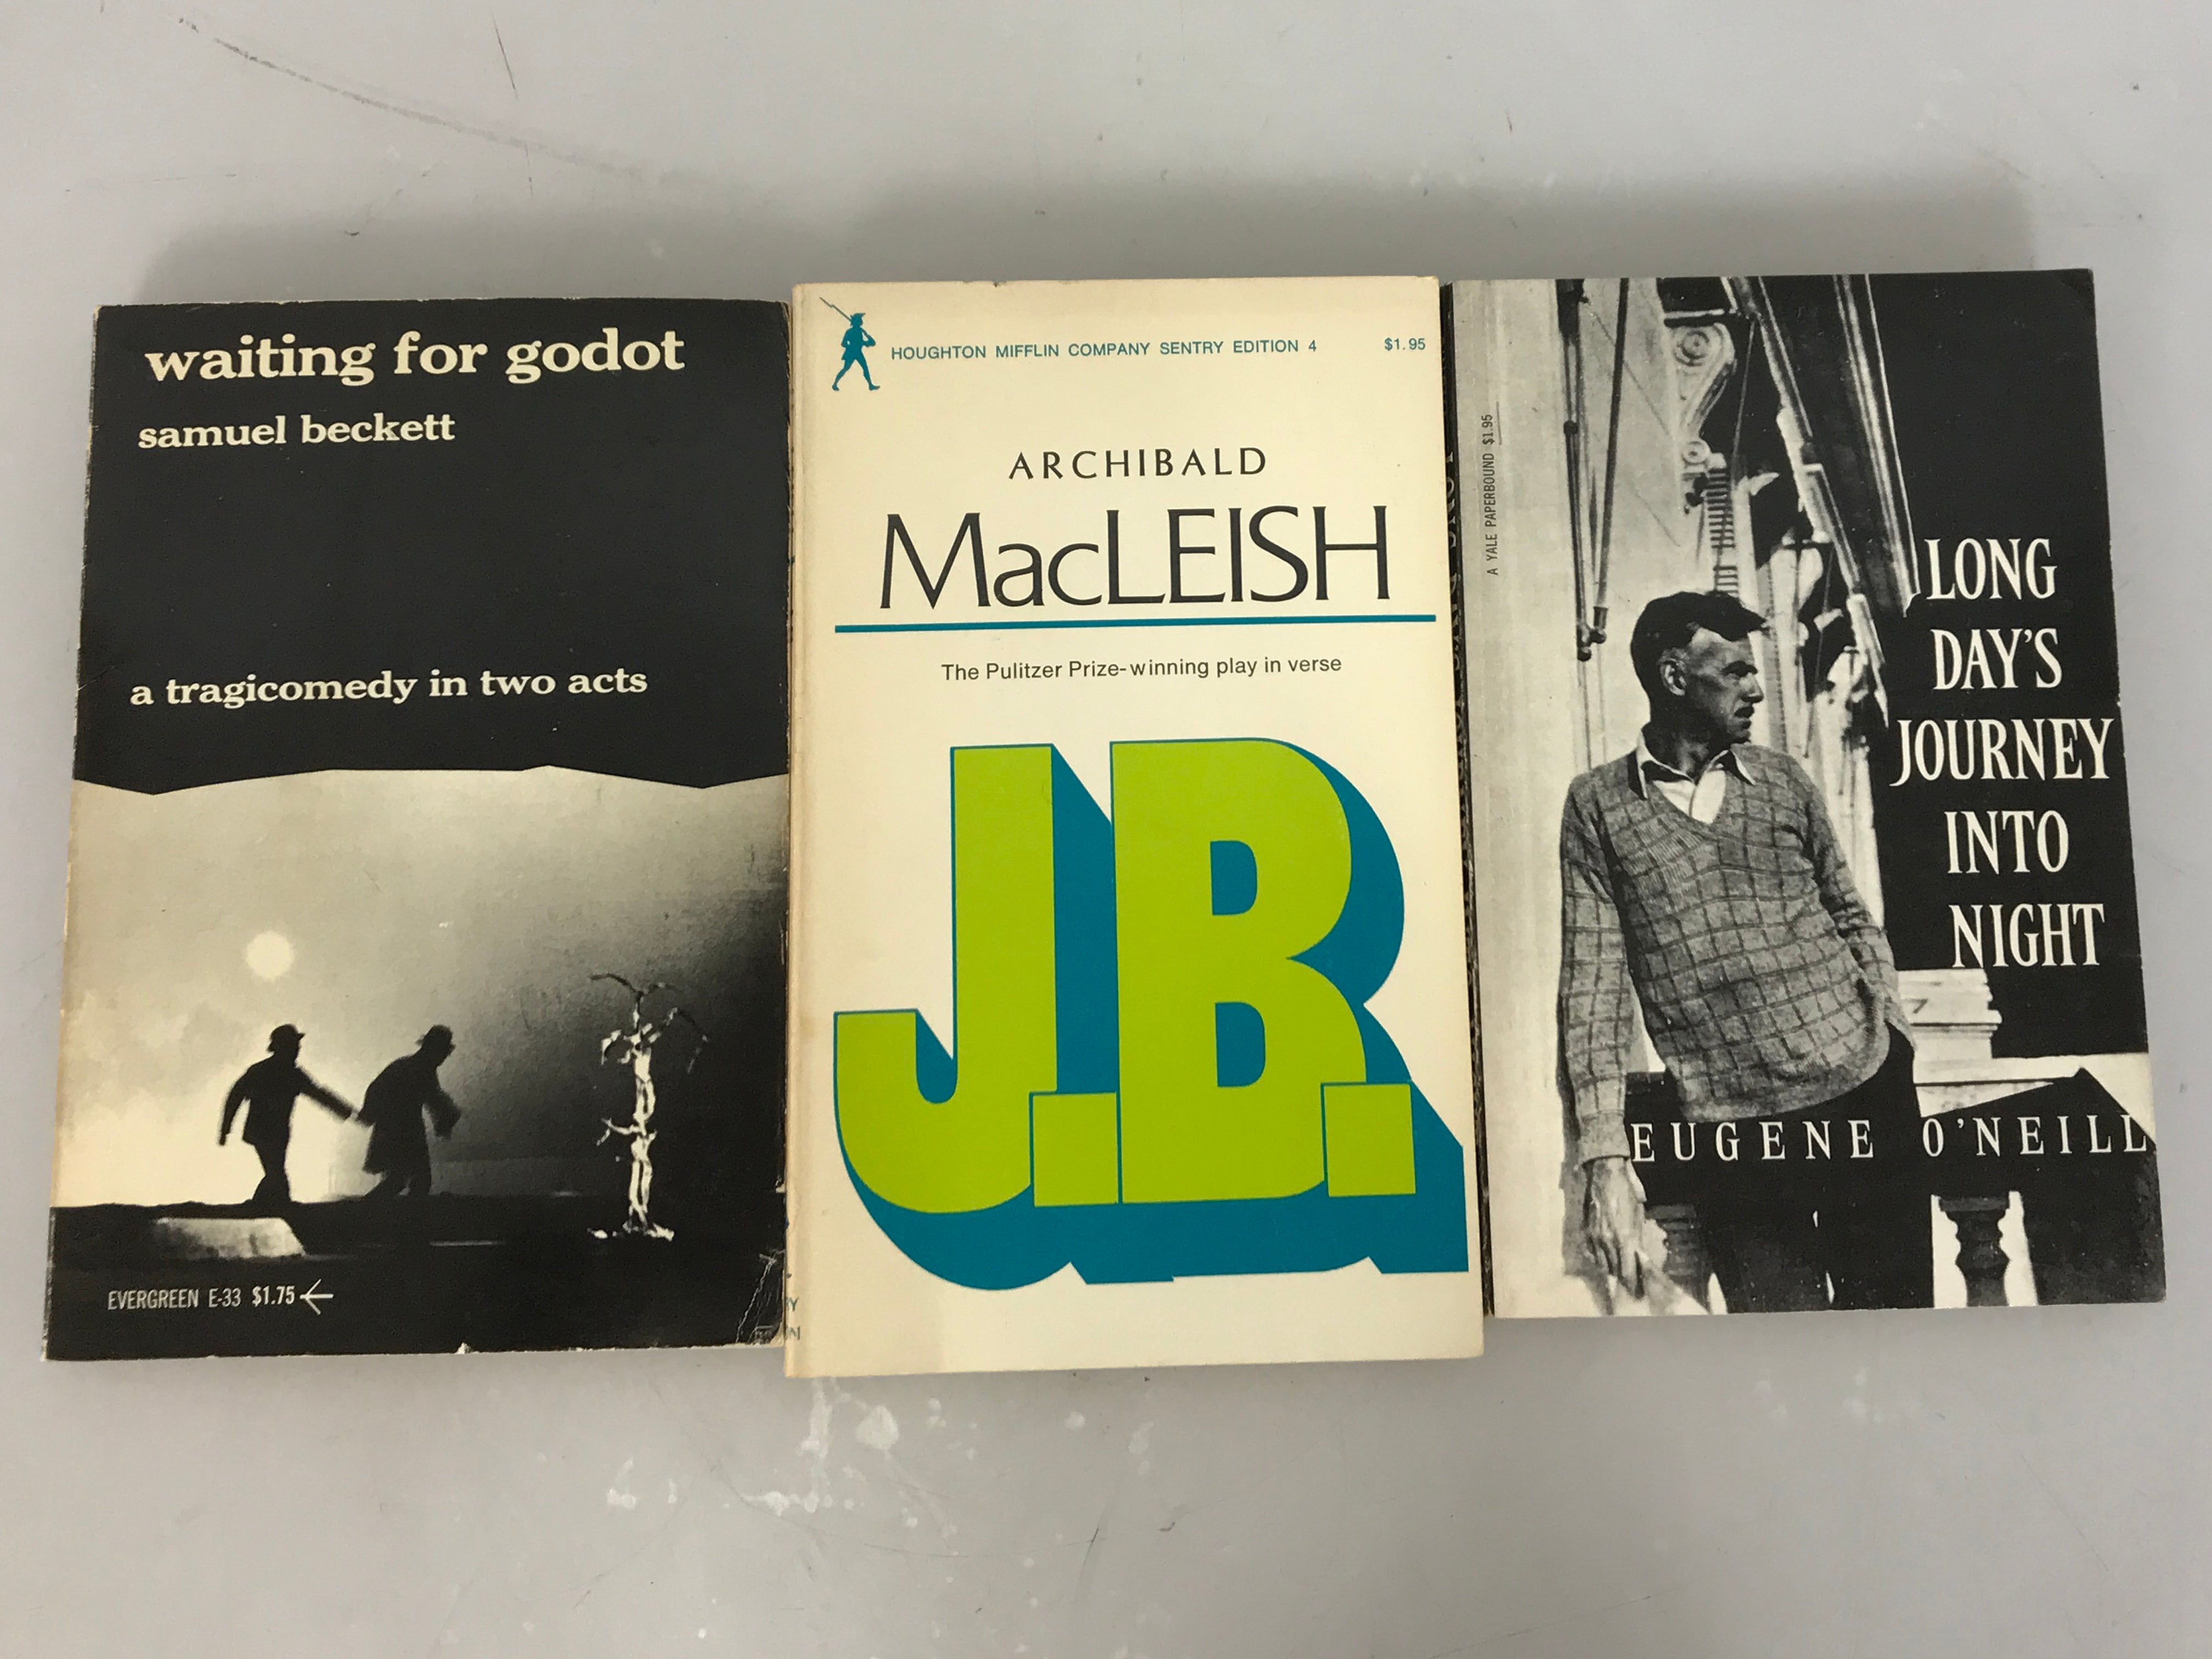 Lot of 3 Classic Plays: Waiting for Godot (1954), J.B. A Play in Verse (1958), and Long Day's Journey Into Night (1972) SC